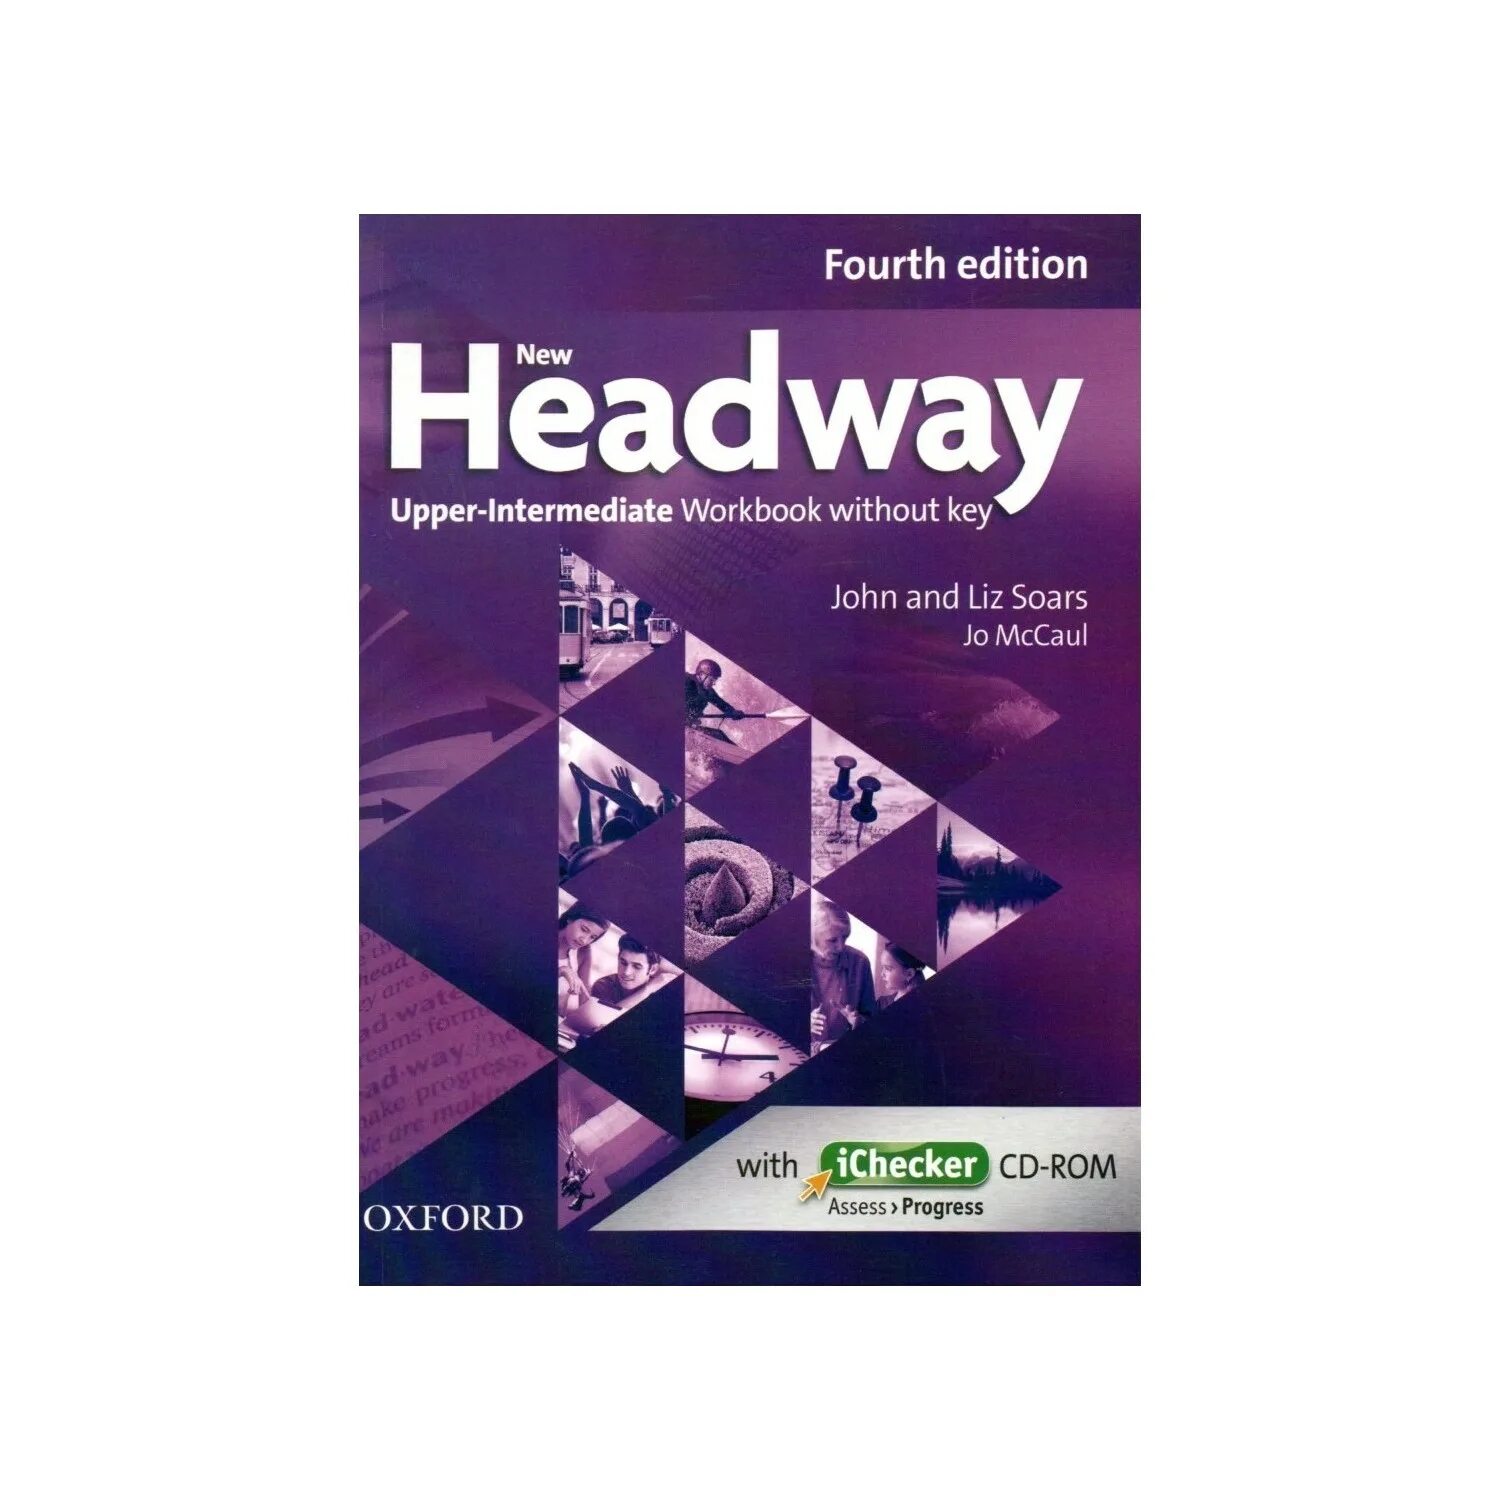 New headway intermediate 5th edition. Headway 4 Edition Upper-Intermediate. New Headway 4th Edition. Headway Upper Intermediate 5th Edition New комплект. New Headway 3rd Edition.